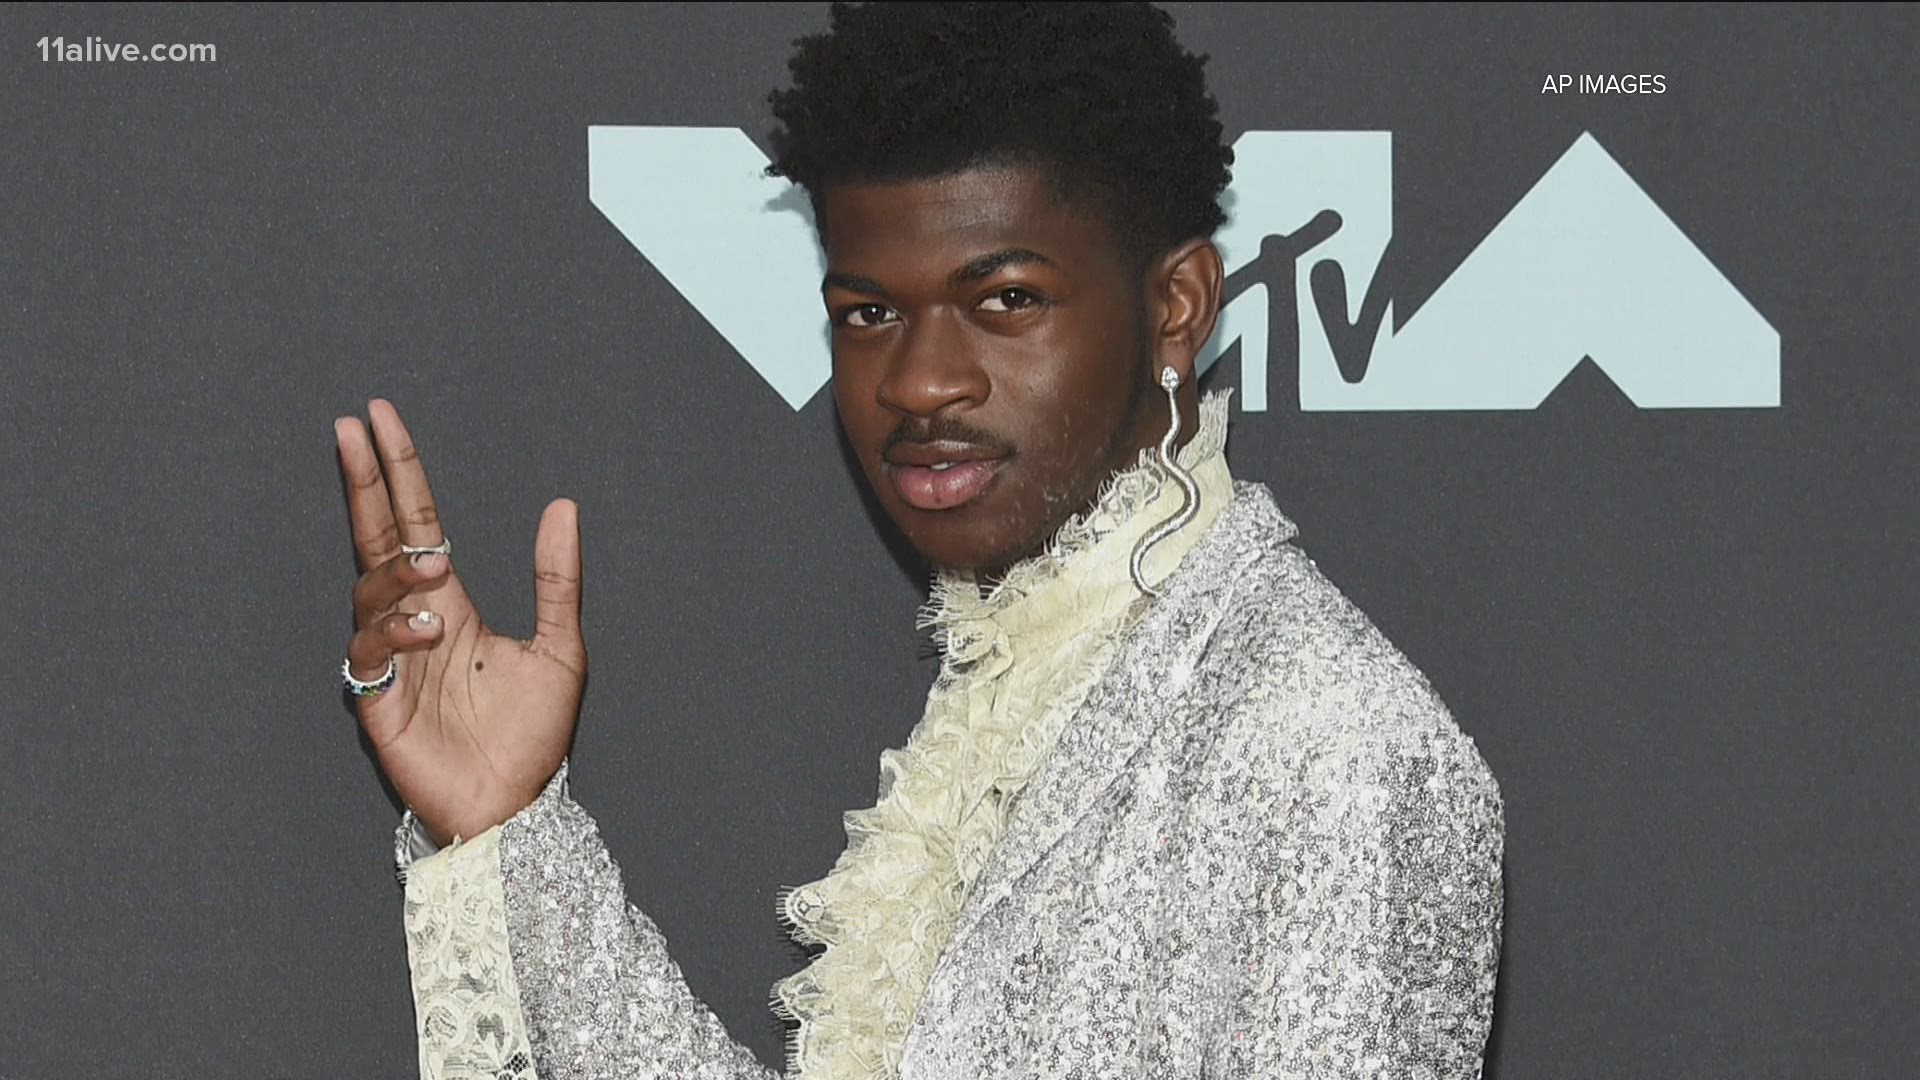 After the news broke about the song becoming number one, Lil Nas X went to social media celebrating the instant success of the single.